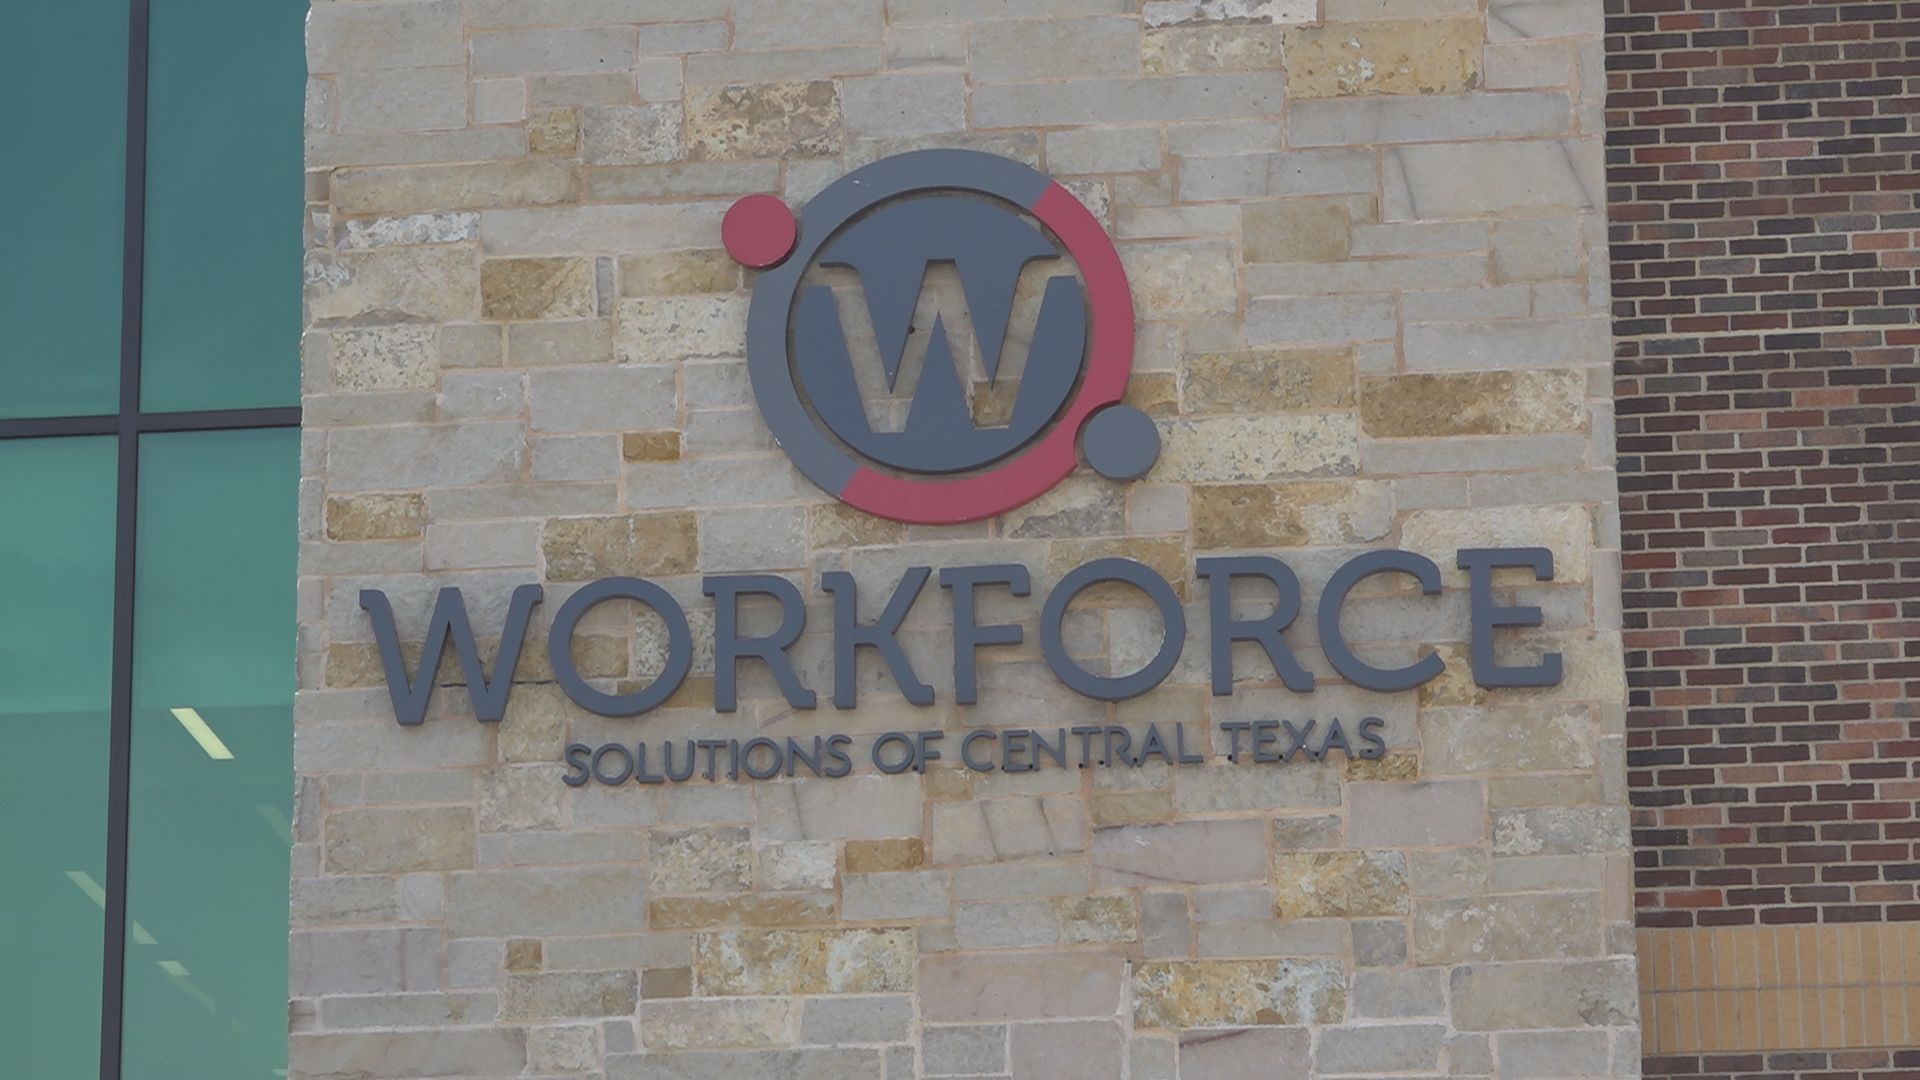 Workforce Solutions uses WorkinTexas.com, the largest job board in the state and in the past month, more than 2,000 people registered to get connected with jobs.